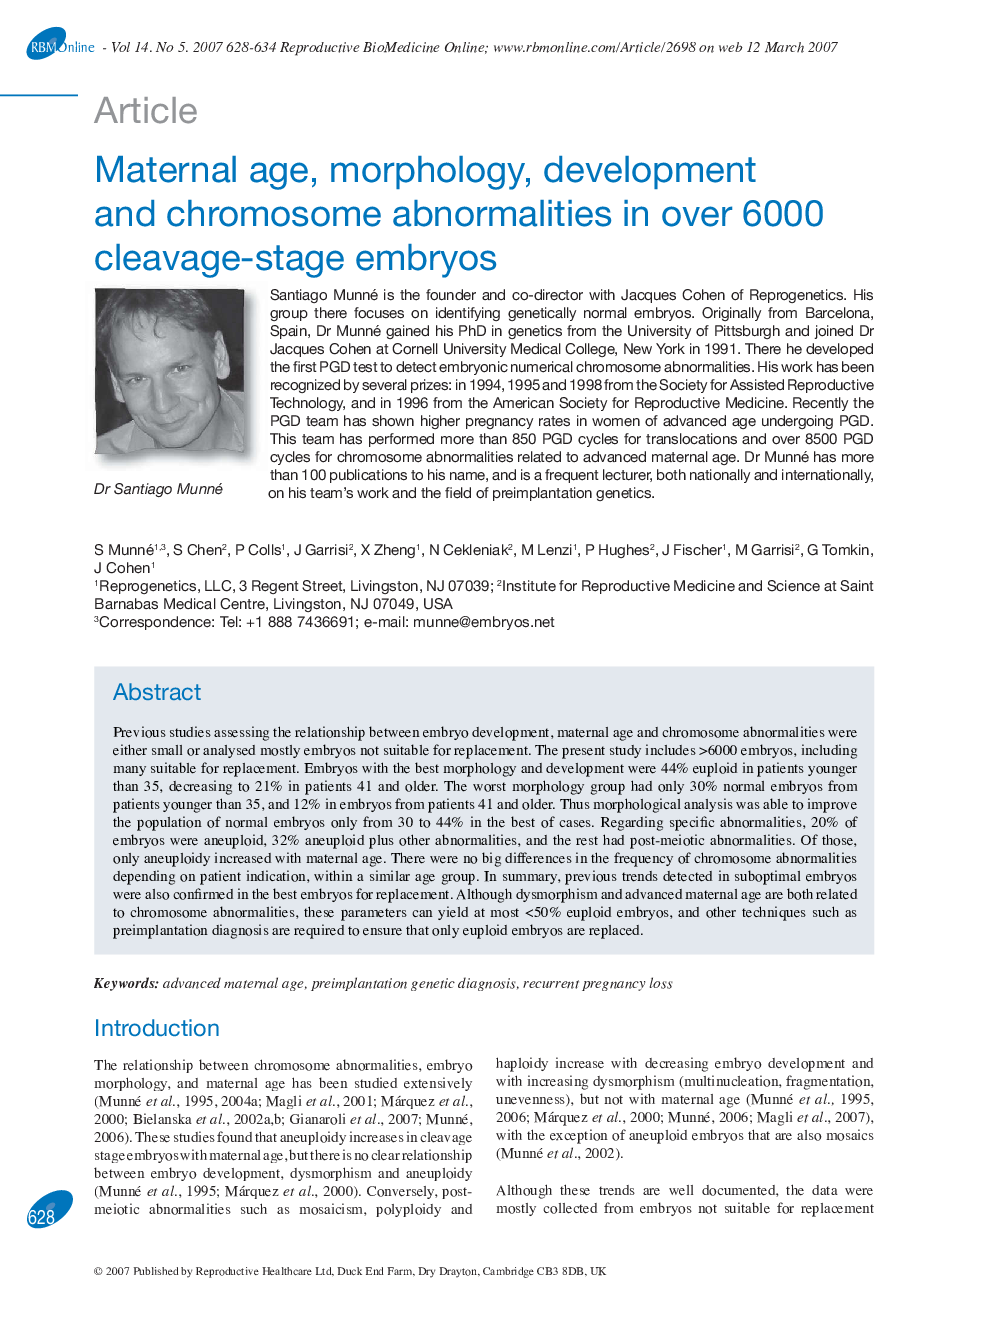 Maternal age, morphology, development and chromosome abnormalities in over 6000 cleavage-stage embryos